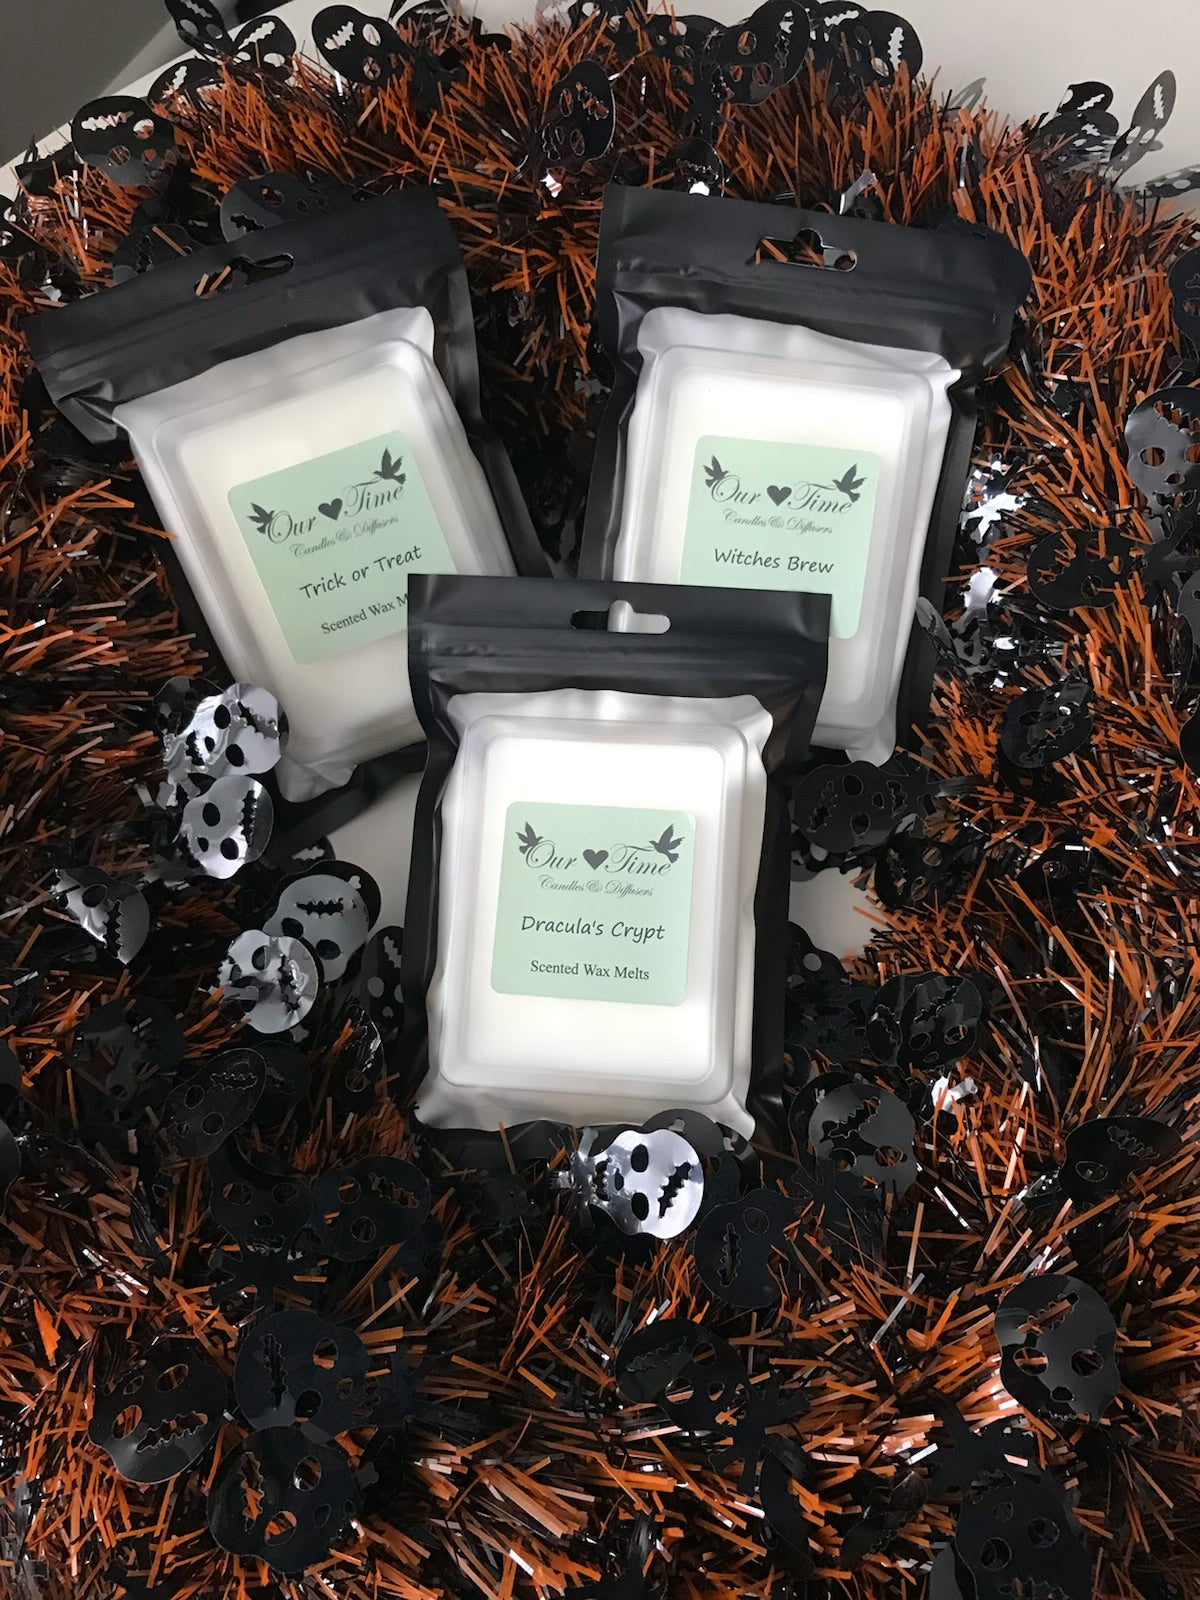 Halloween Melts from Our Time Candles and Diffusers